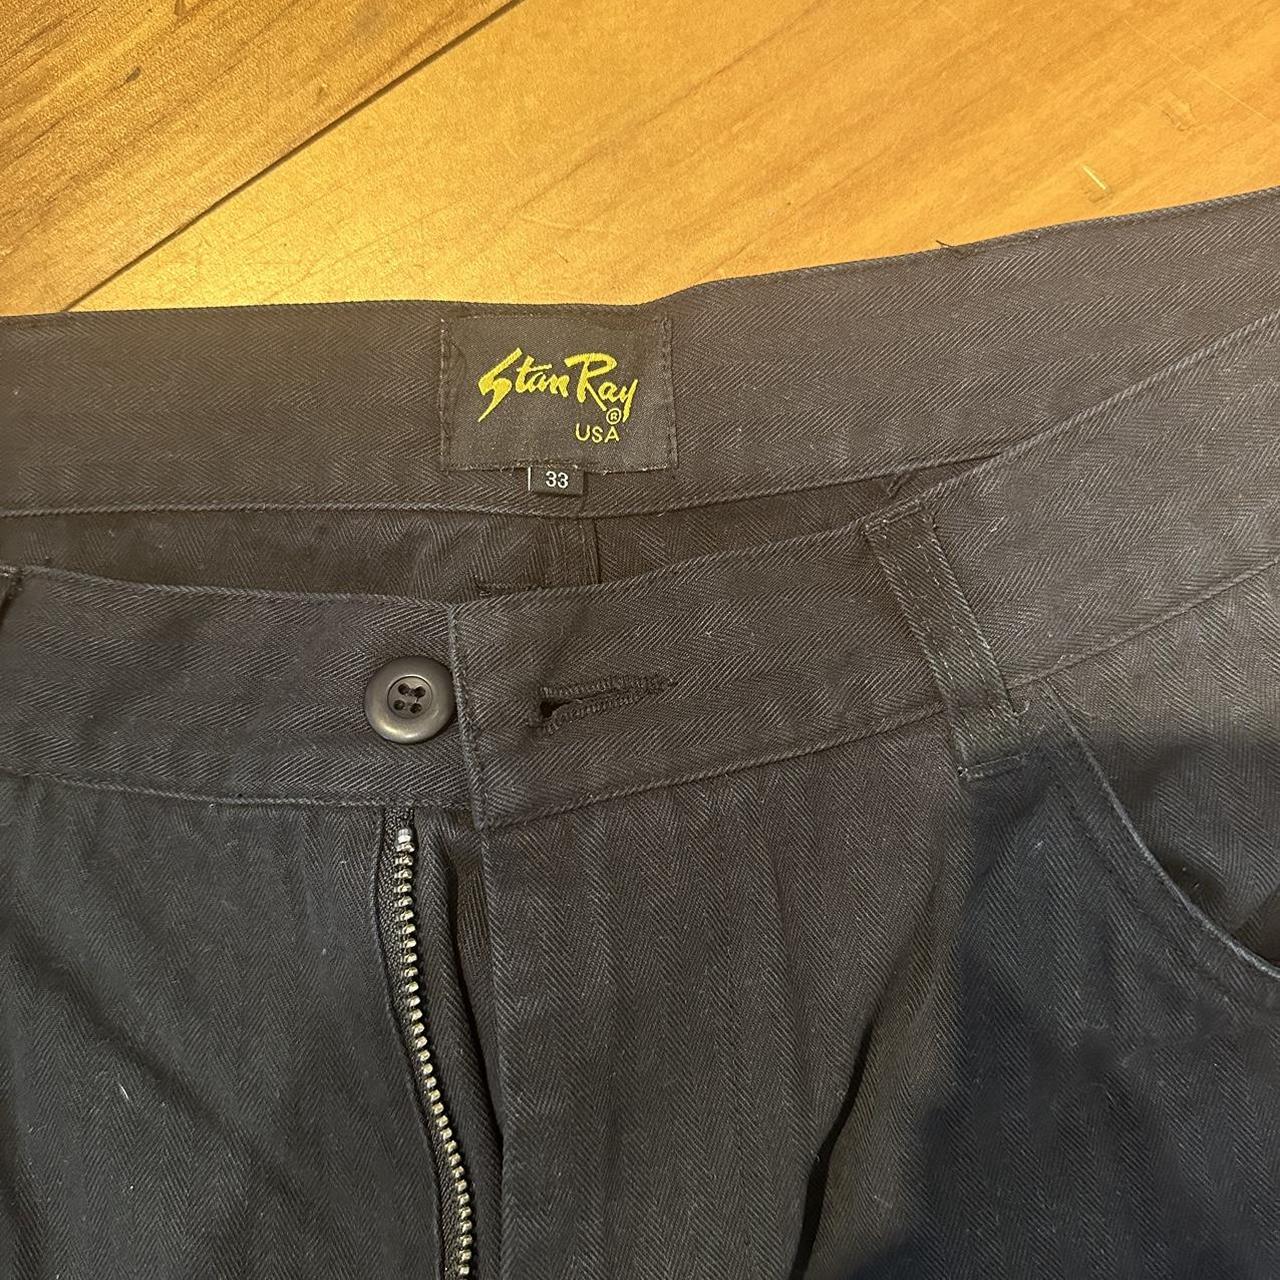 Stan Ray Work Pants Wide relaxed fit #stanray - Depop